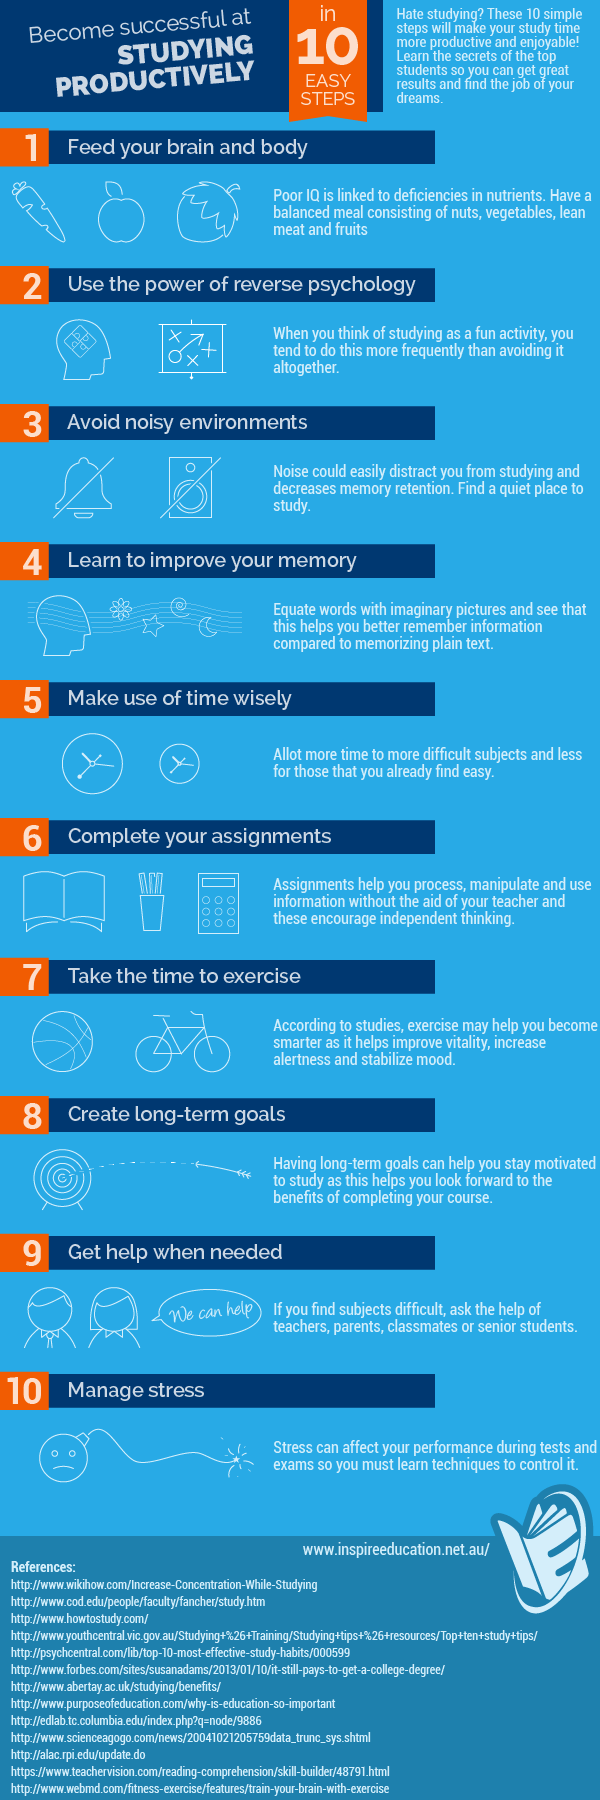 Become-Successful-At-Studying-In-10-Steps1